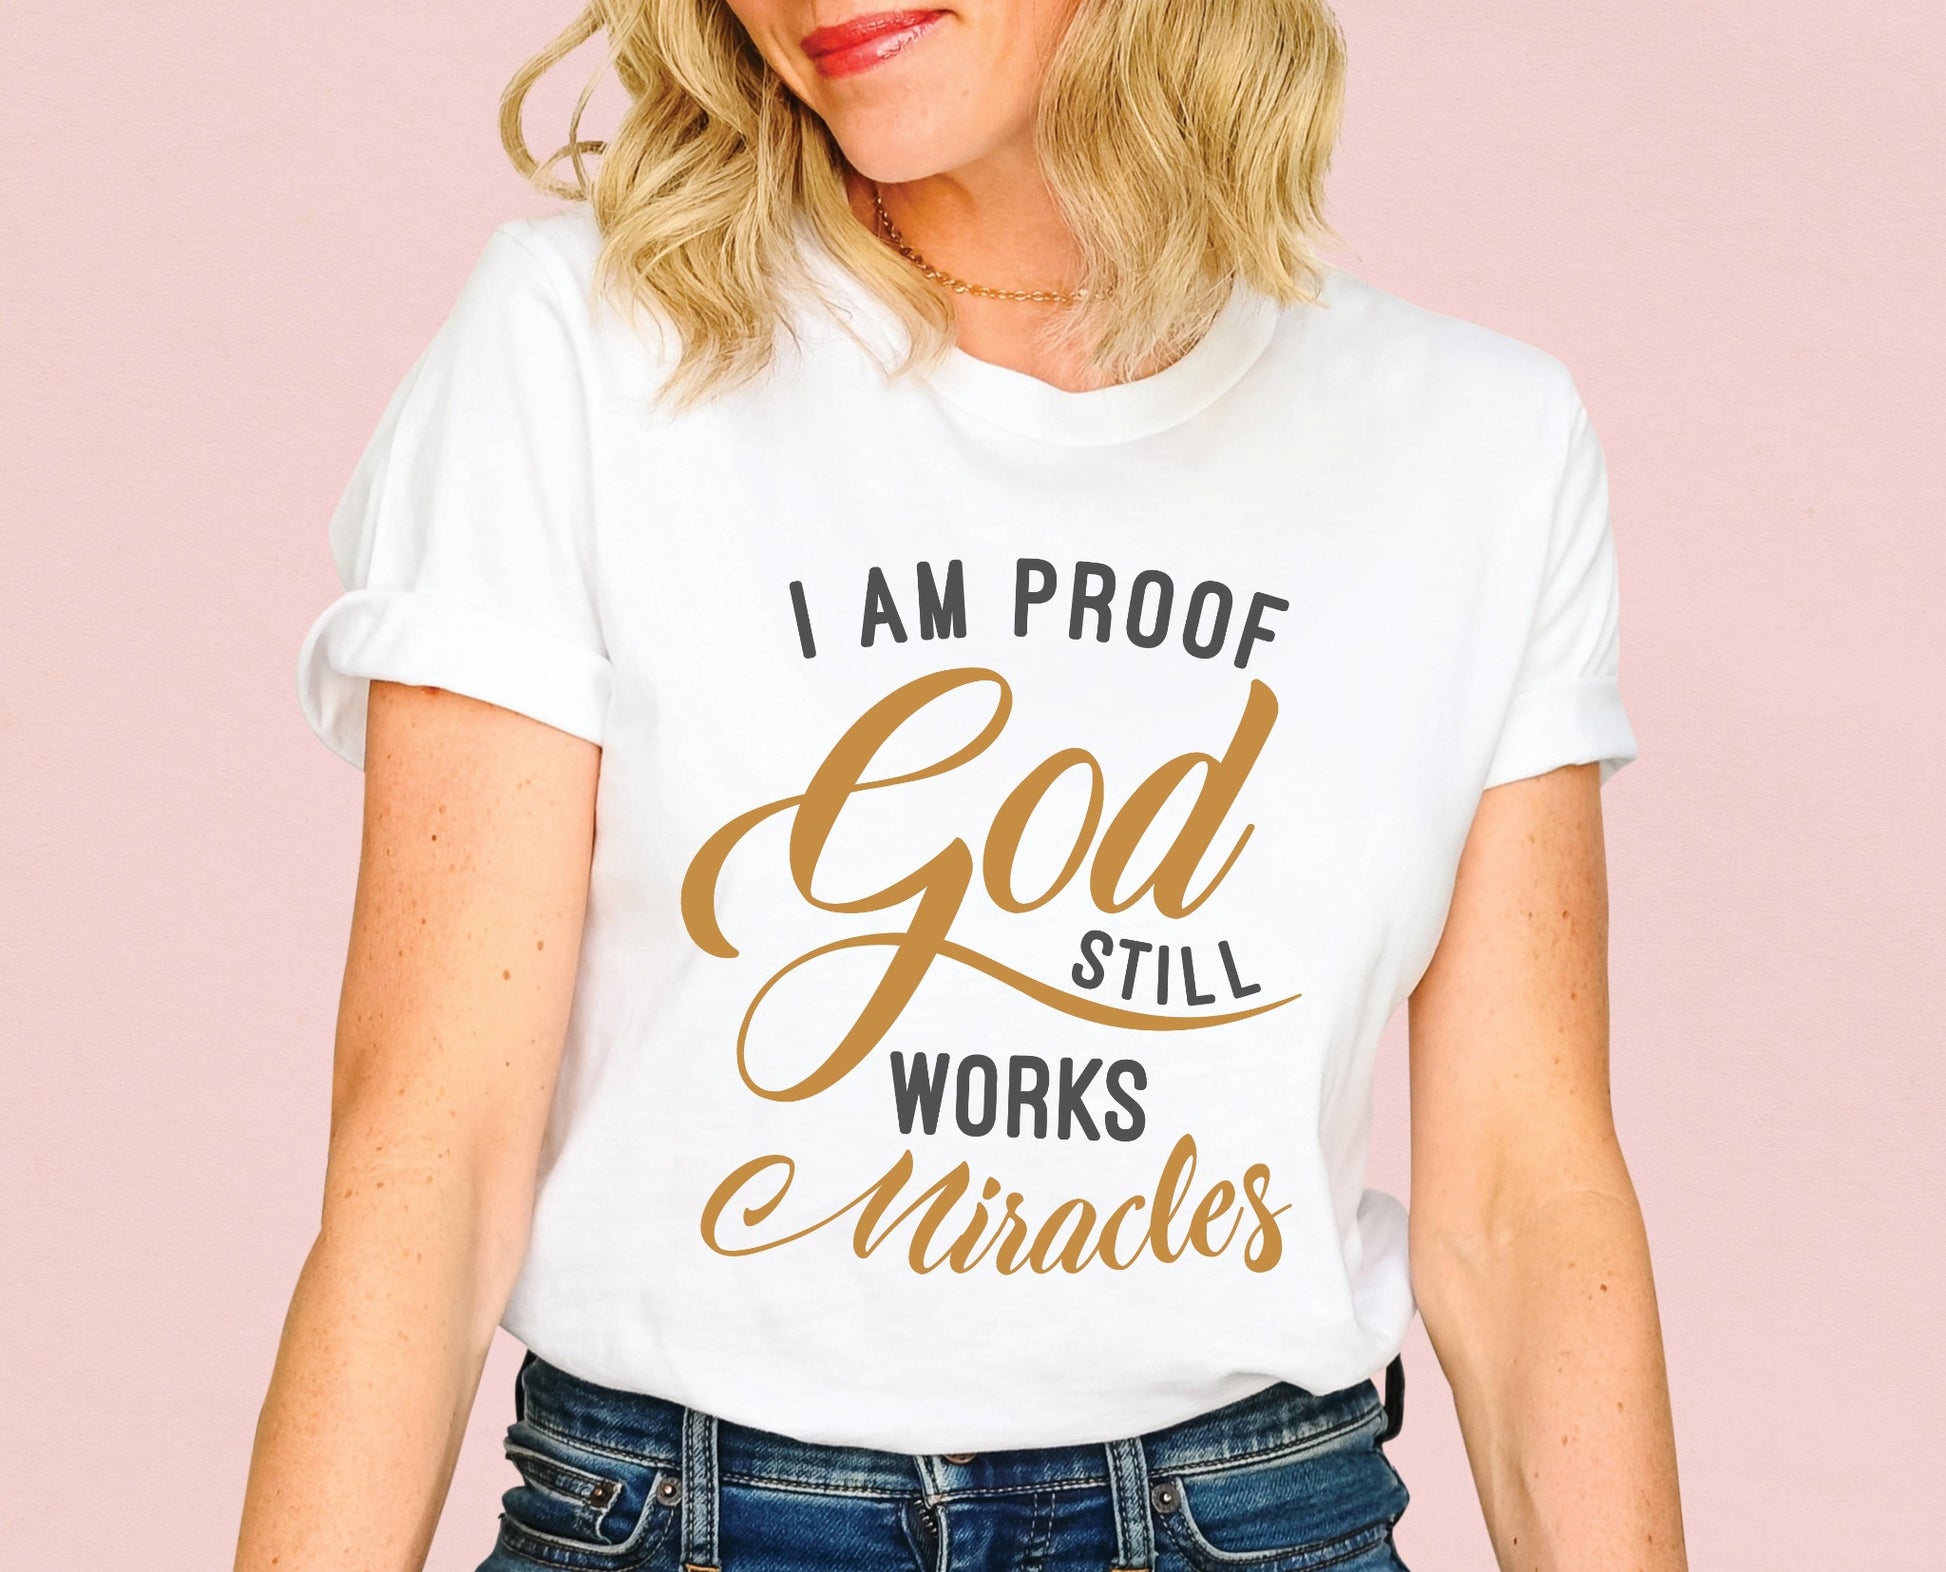 I am proof God still works miracles Christian aesthetic testimony design printed in charcoal and gold on white unisex t-shirt for women